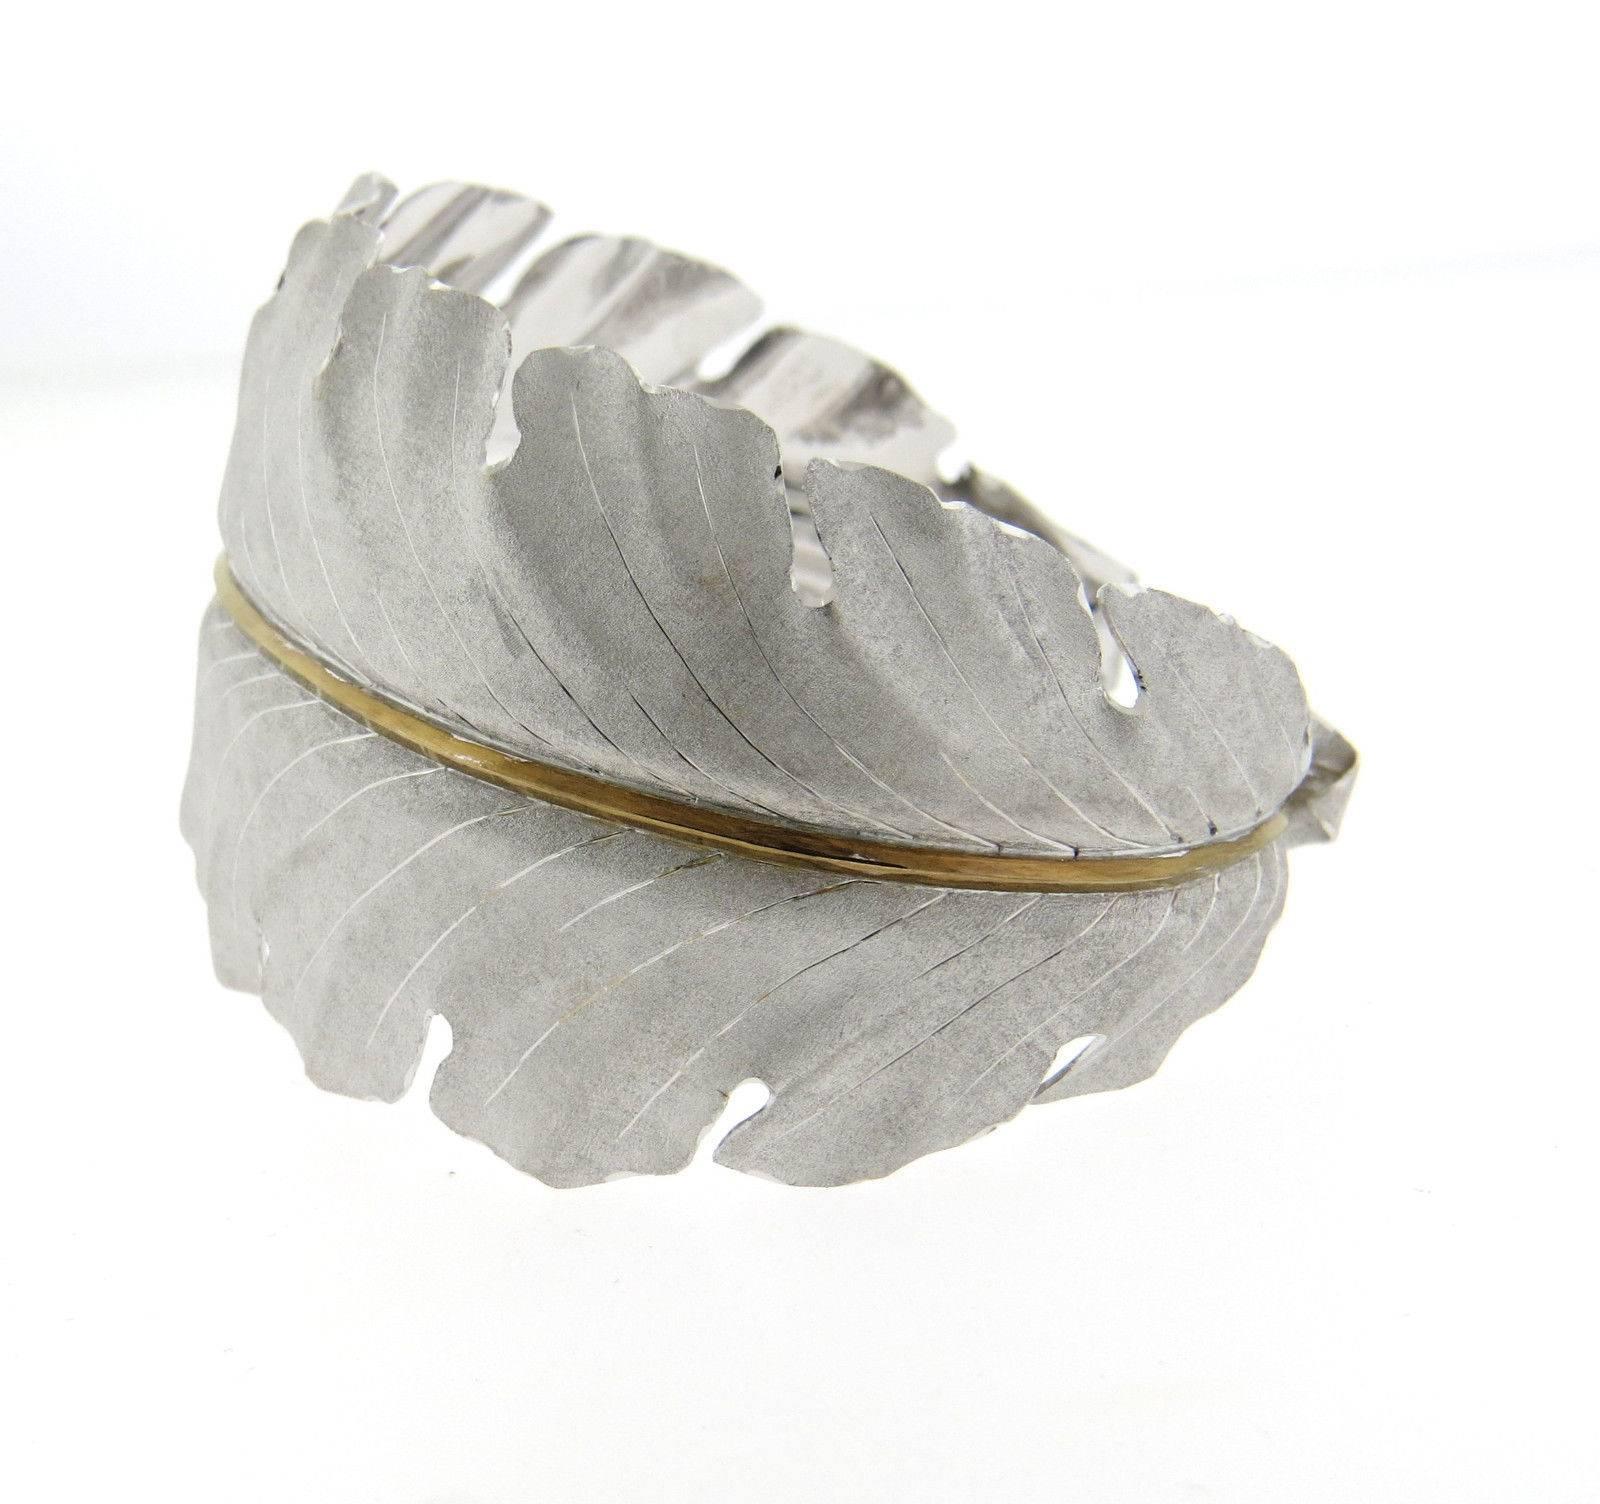 An 18k yellow gold and sterling silver leaf motif cuff bracelet.  Crafted by Buccellati, the bracelet will fit up to a 7